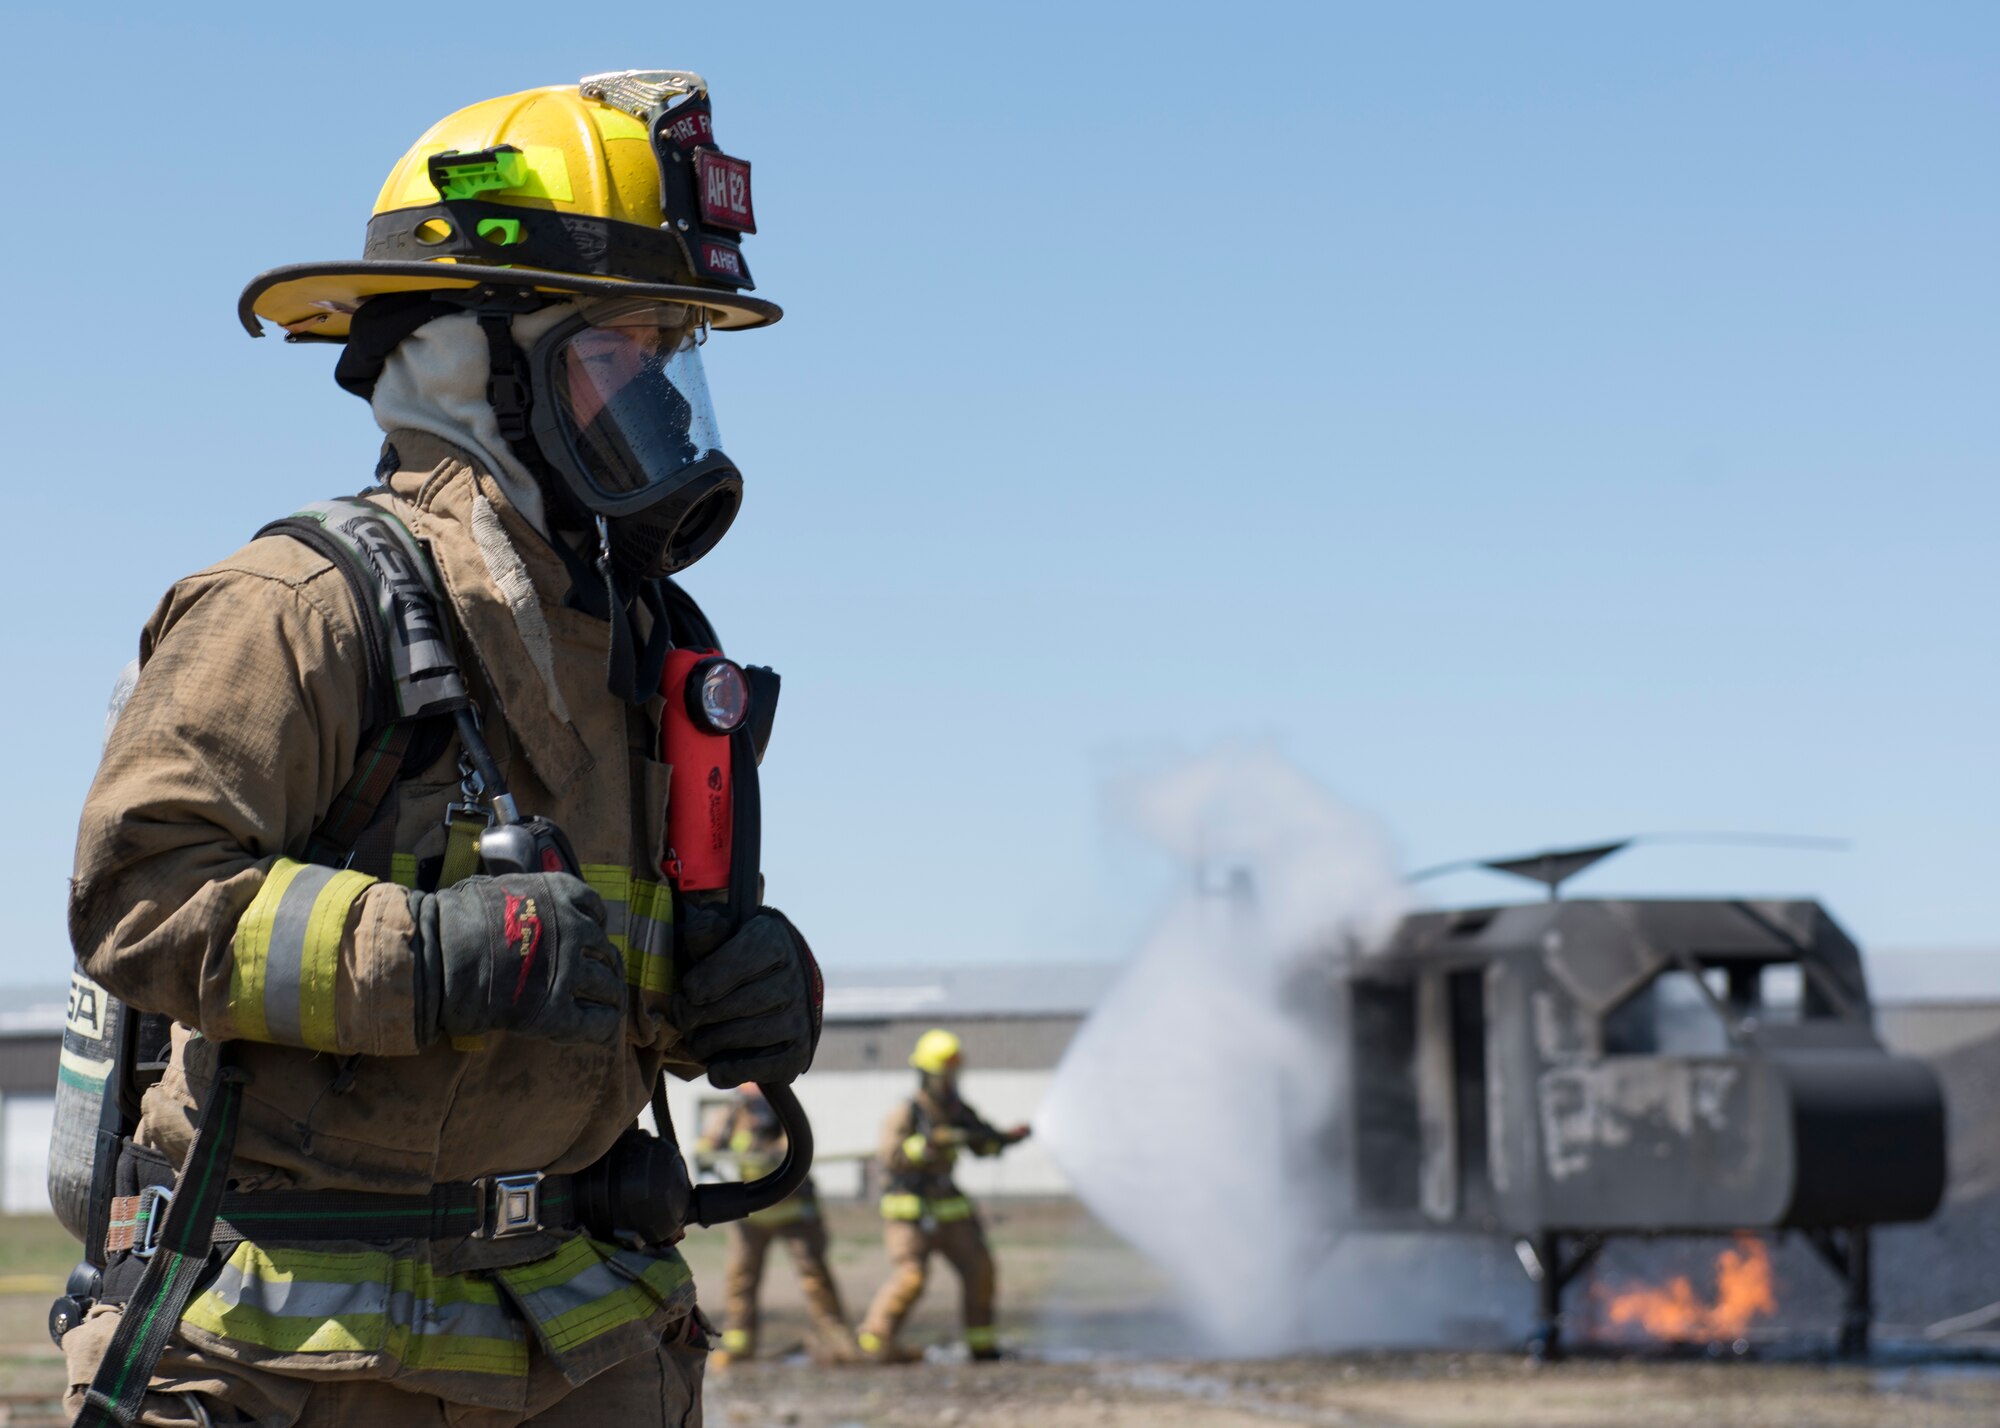 A firefighter from the Airway Heights Fire Department the scene around a helicopter crash trainer during a Major Accident Response Exercise drill near Fairchild Air Force Base, Washington, May 9, 2019.